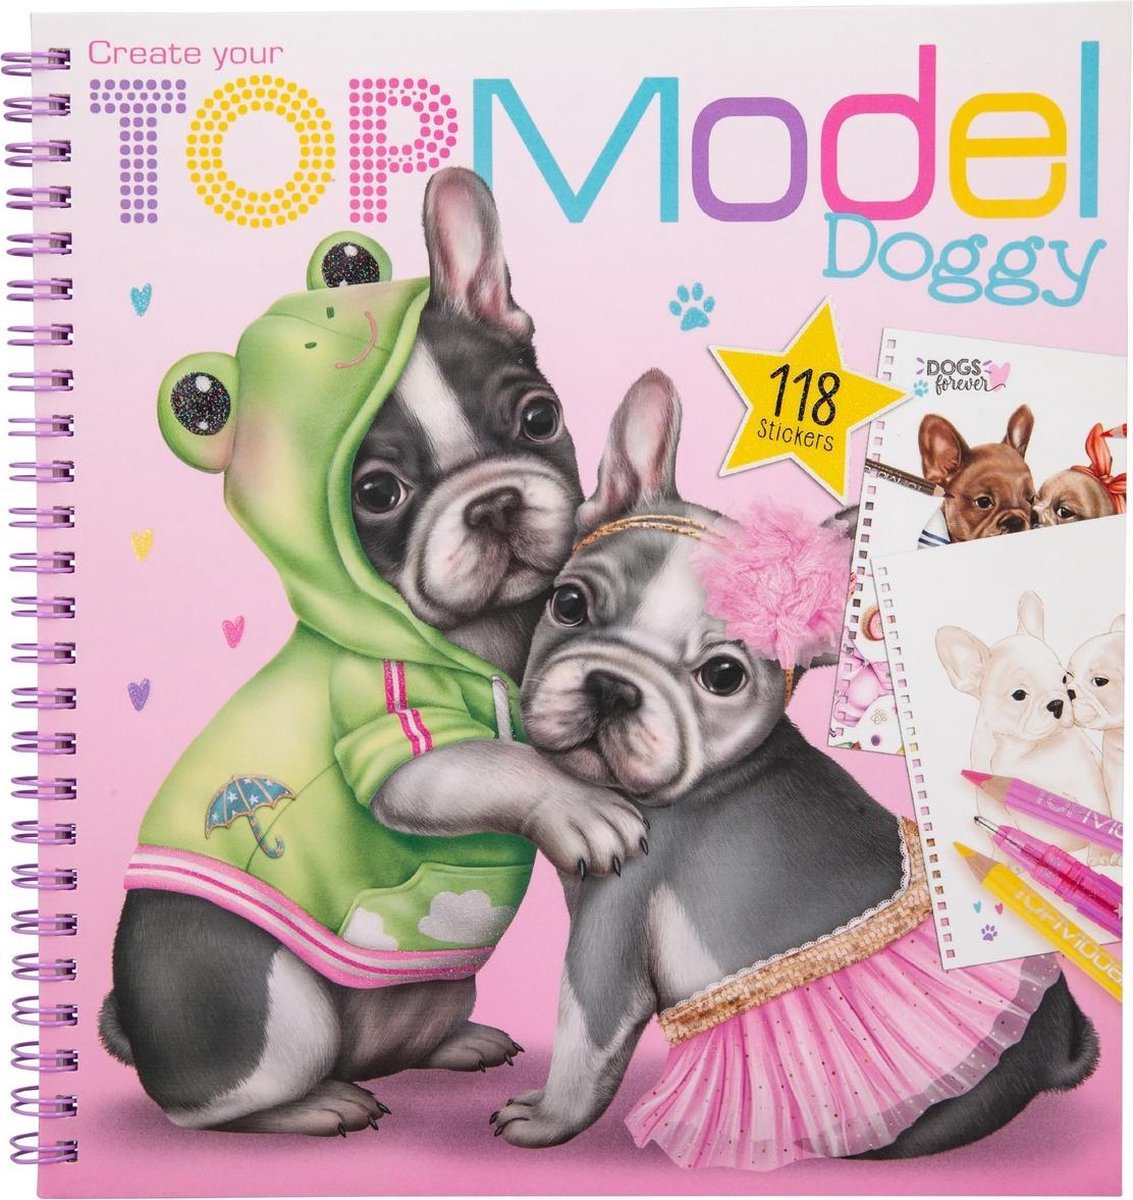 Top Model - Doggy Colouring Book (0411025) /Arts and Crafts /Multi